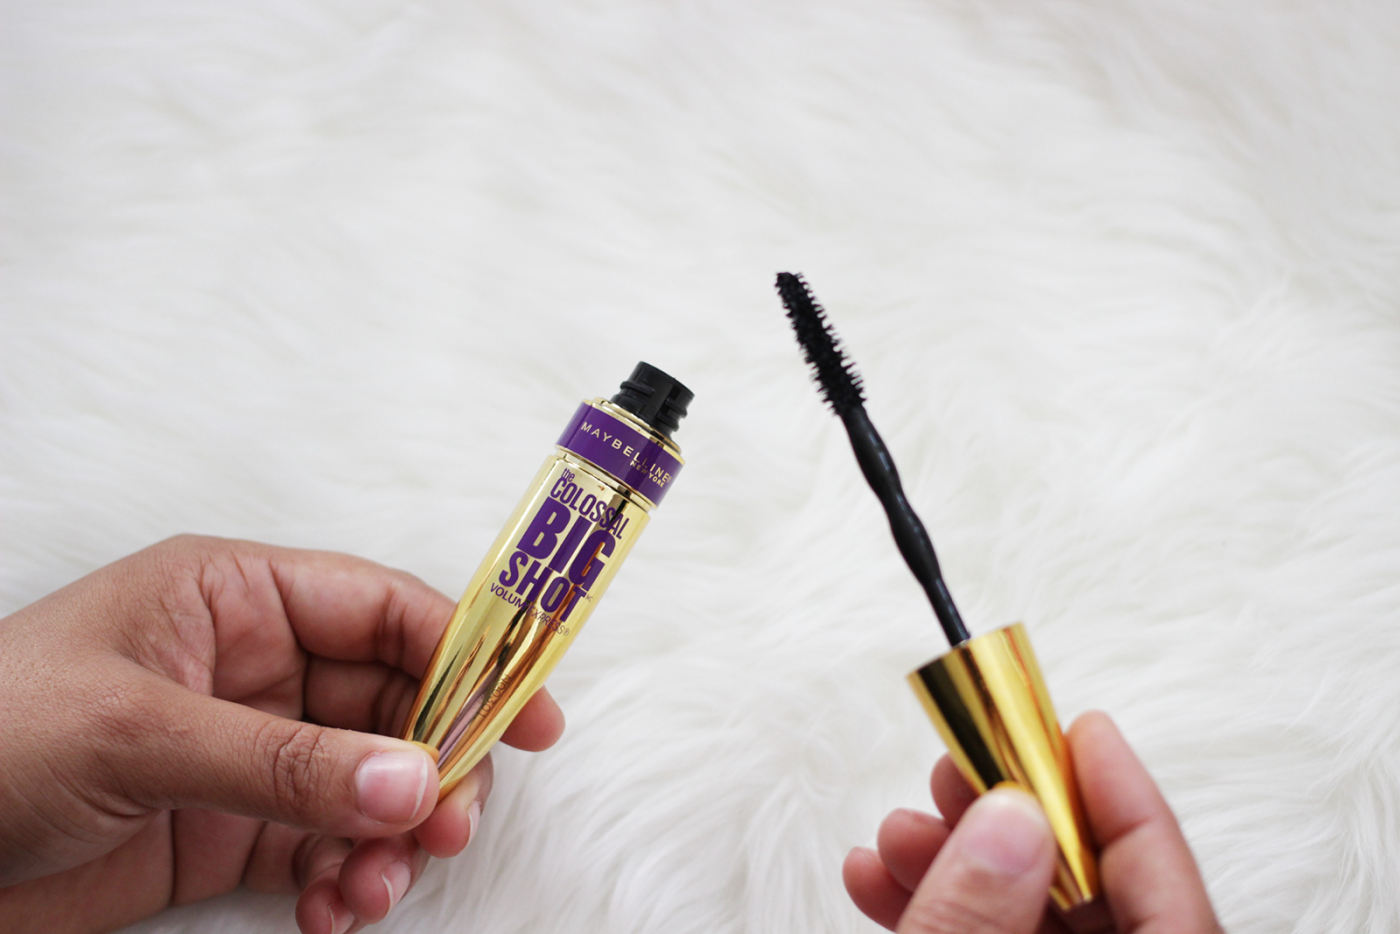 Confession time: I can’t remember a time when I have NEVER not worn drugstore mascara. There is a reason Maybelline is a brand trusted by pros, keep reading….